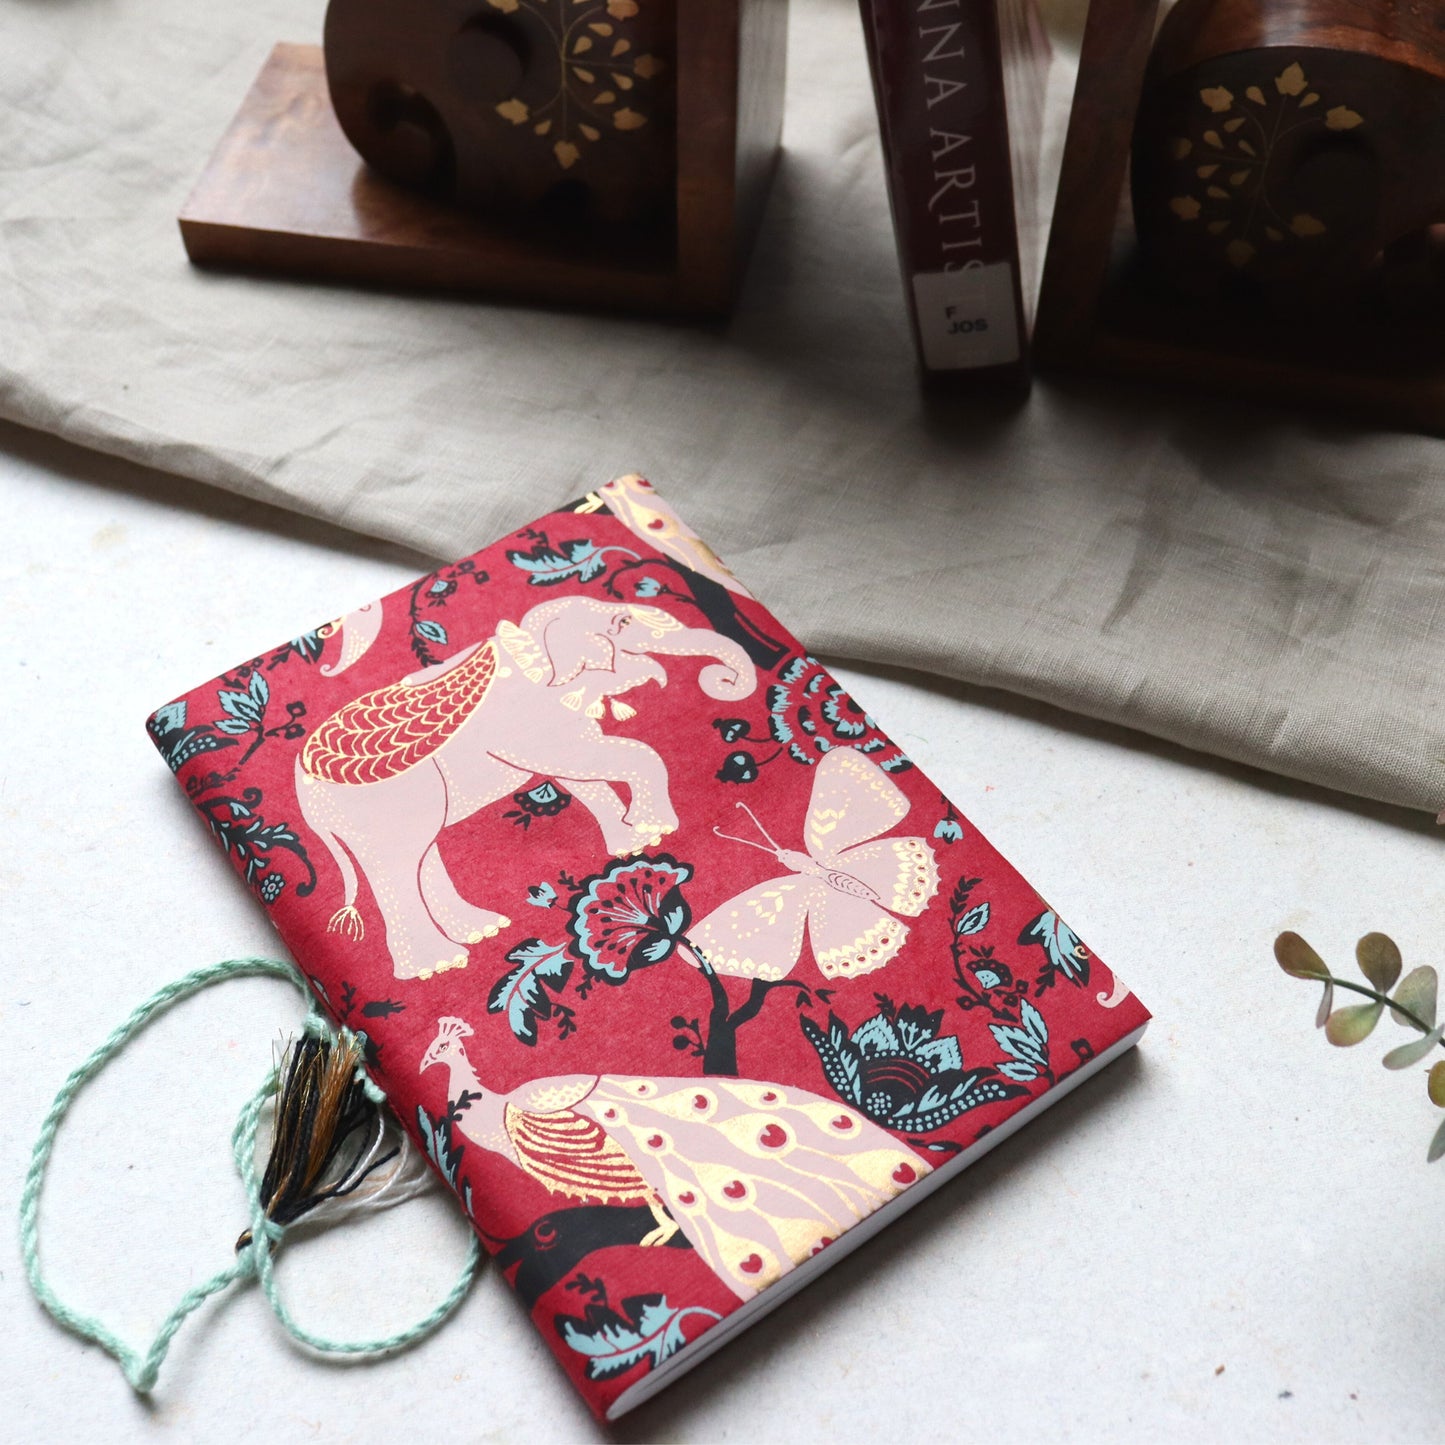 96 Pages Cotton Paper Journal - Handmade Plain Diary, Red Royal Garden - Aksa Home Decor 